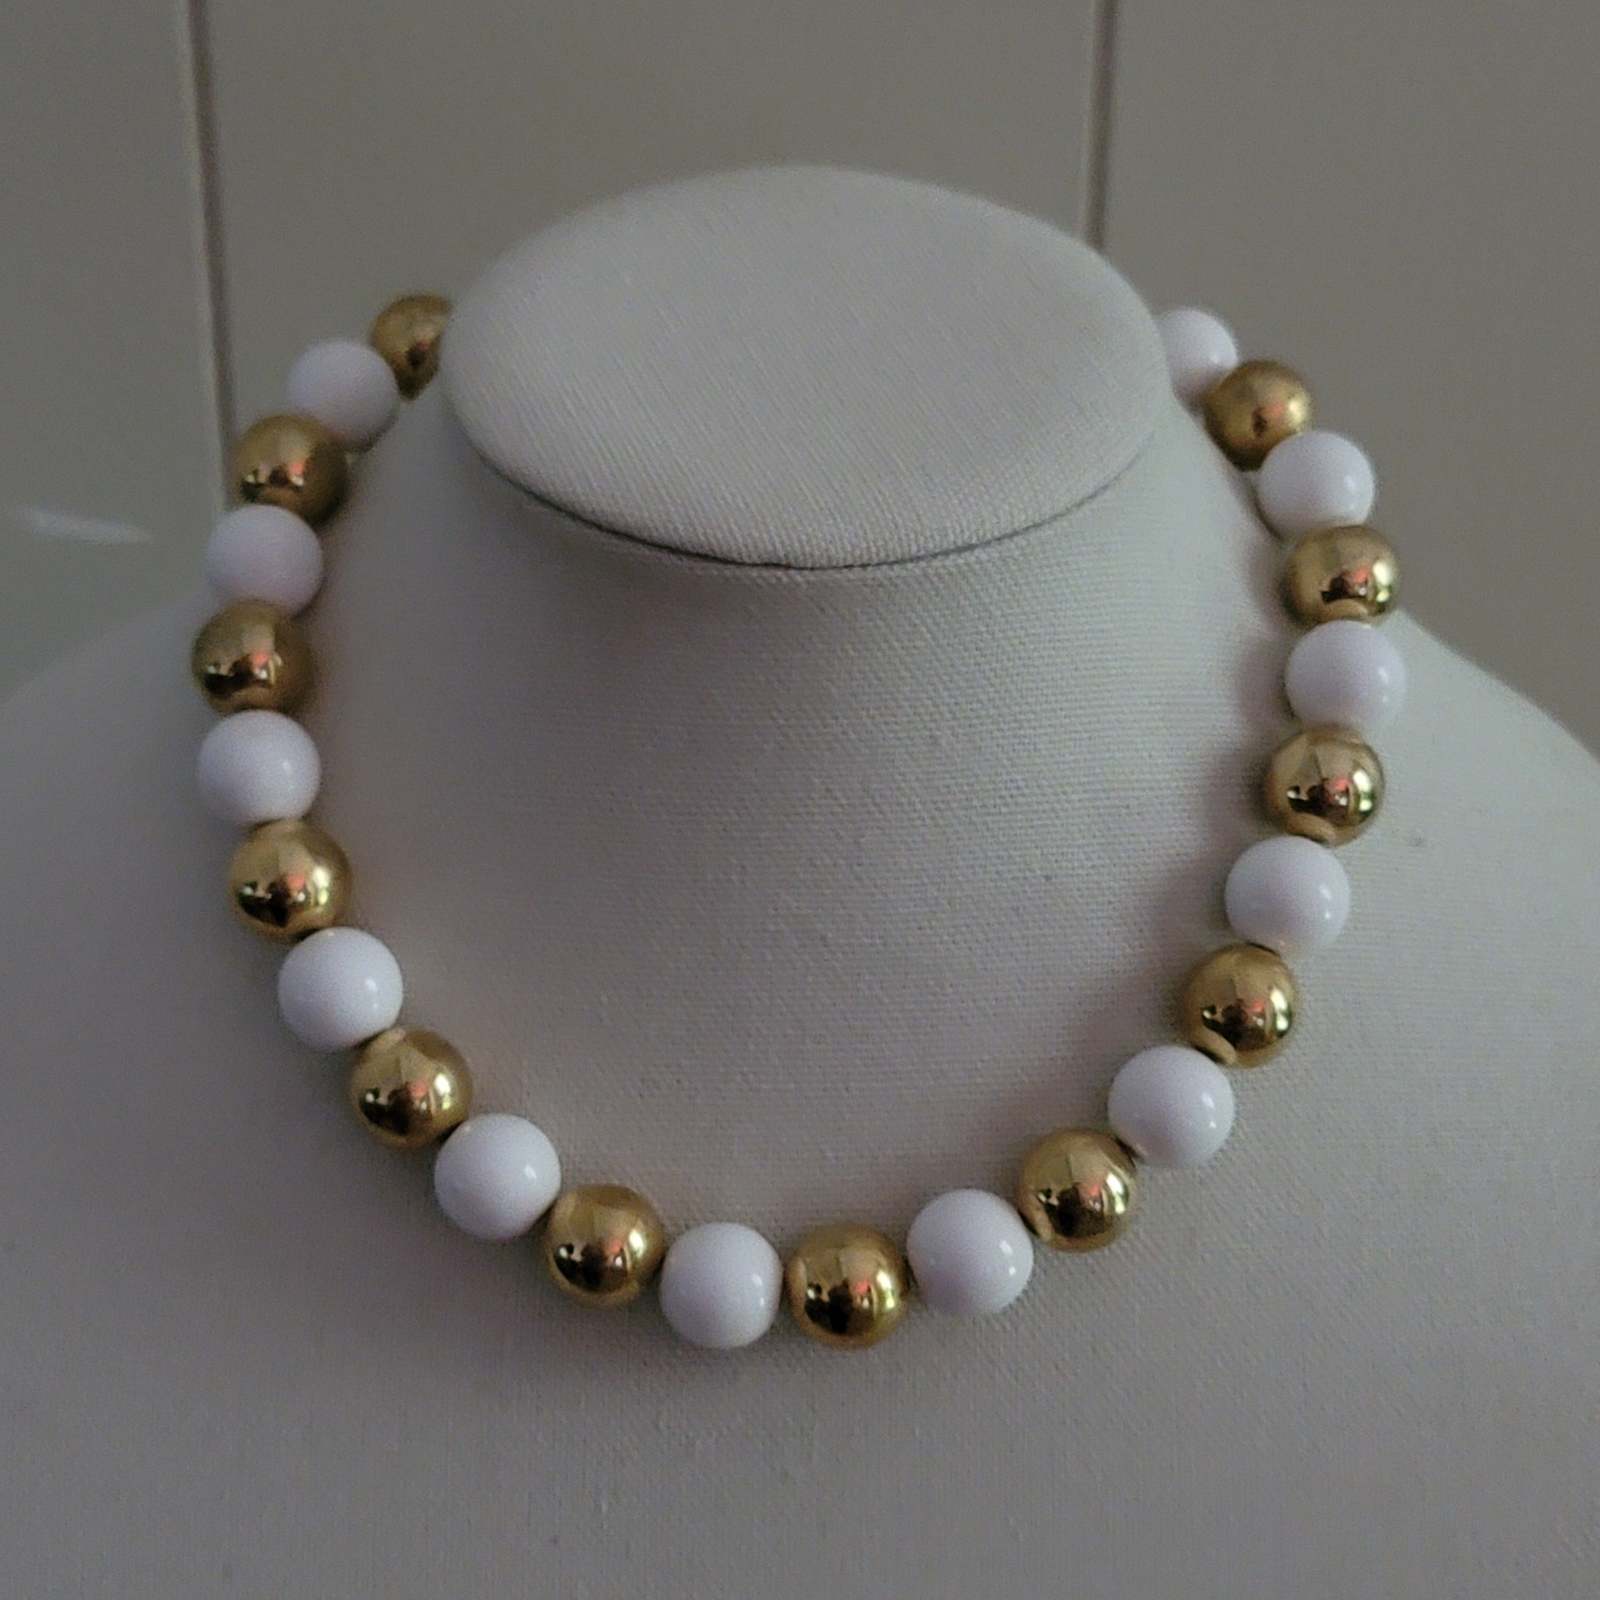 White and Gold Bead Necklace - $12.00